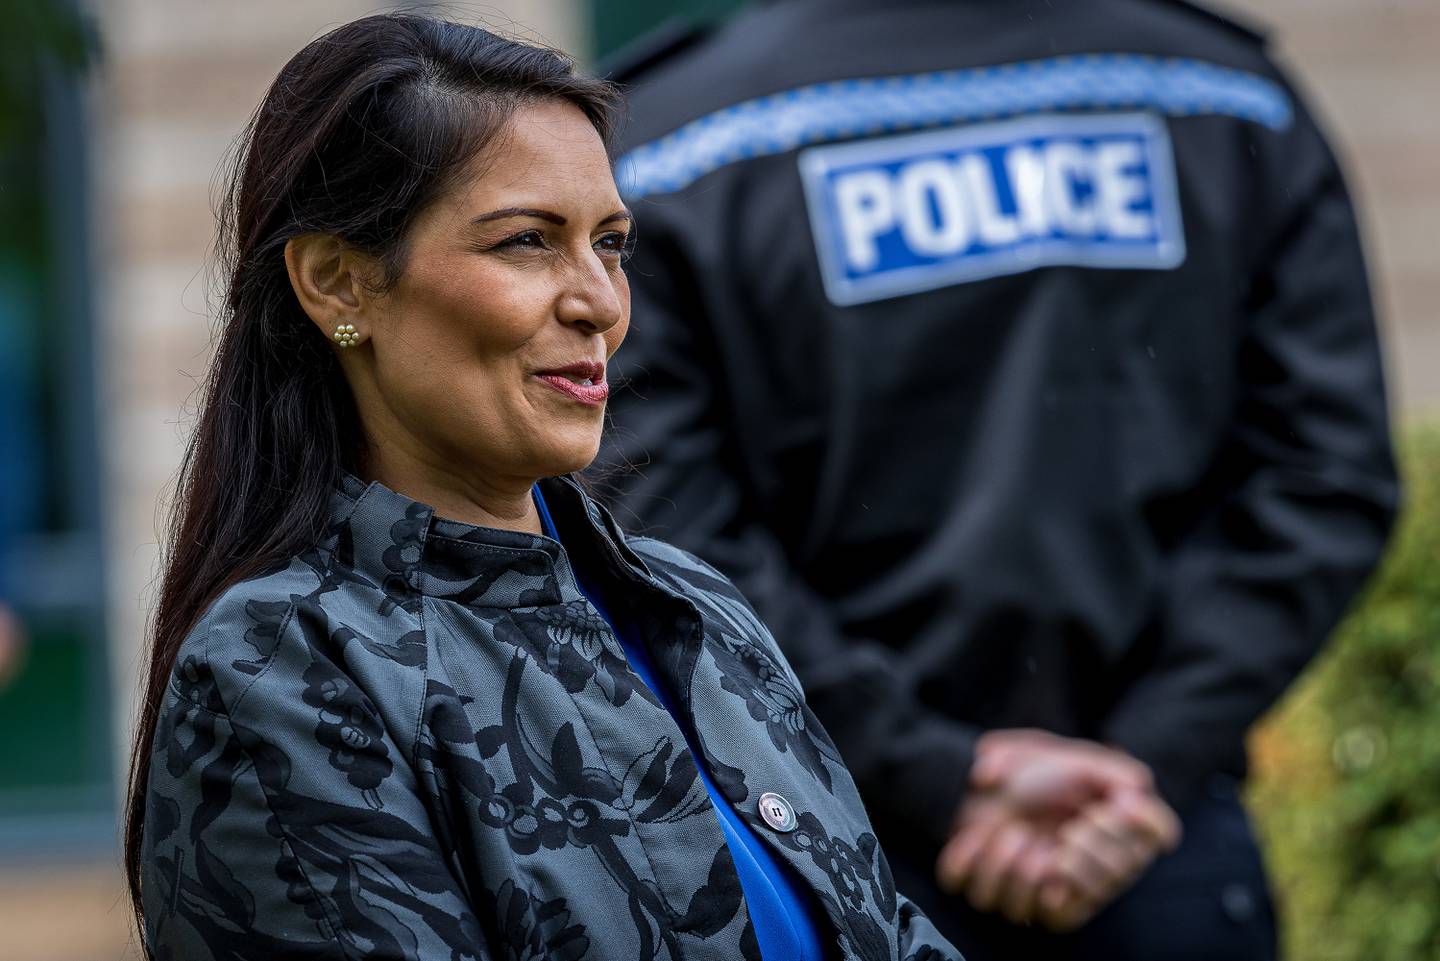 Britain's Home Secretary Priti Patel visits the North Yorkshire Police headquarters in Northallerton, northeast England on July 30, 2020. / AFP / POOL / Charlotte Graham
